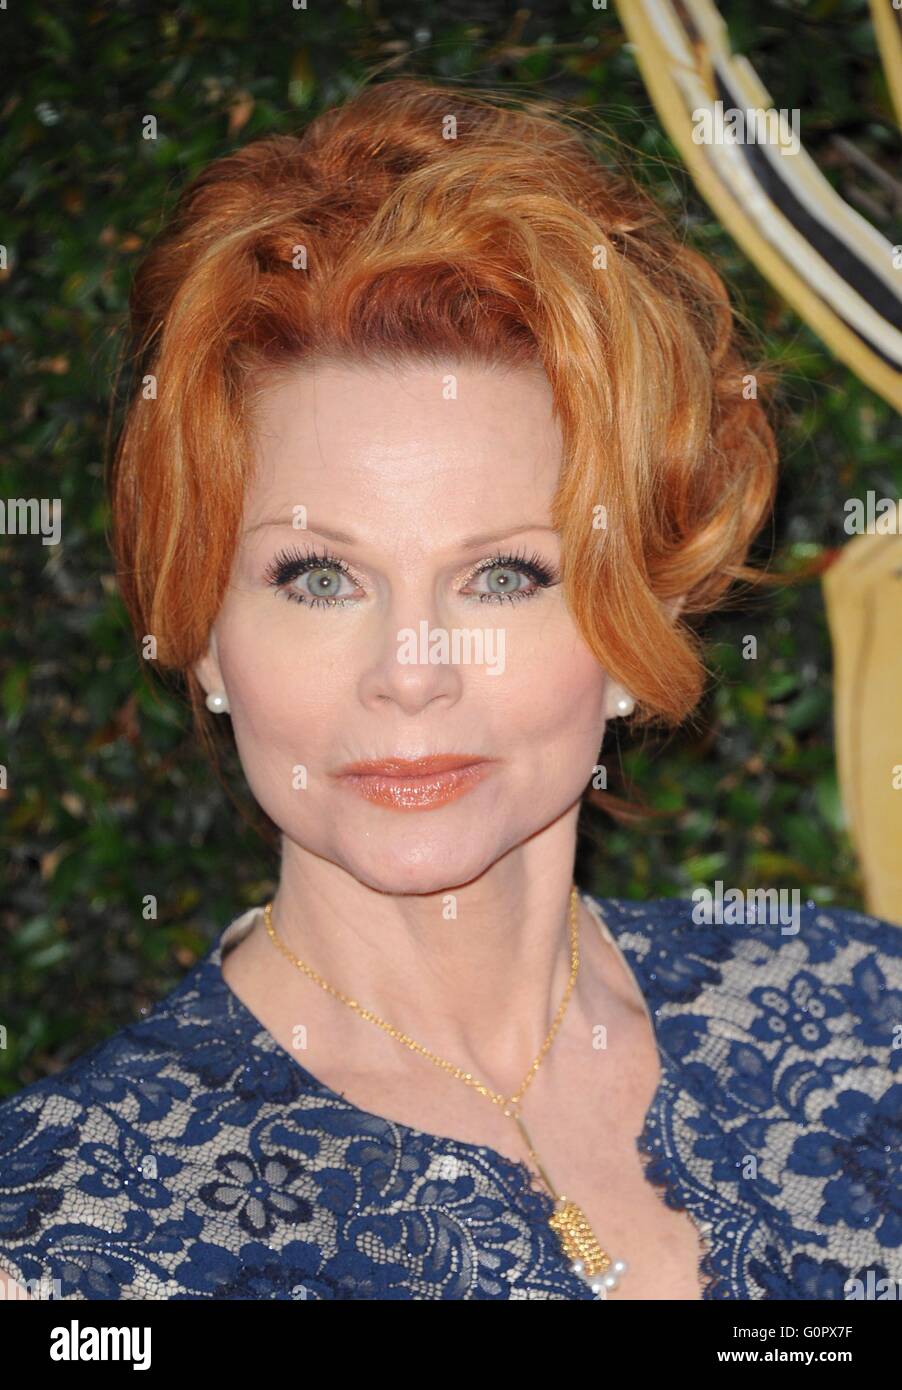 Los Angeles, CA, USA. 29th Apr, 2016. Patsy Pease at arrivals for 43rd Annual Daytime Creative Arts Emmy Awards - Arrivals, Westin Bonaventure Hotel and Suites, Los Angeles, CA April 29, 2016. © Elizabeth Goodenough/Everett Collection/Alamy Live News Stock Photo